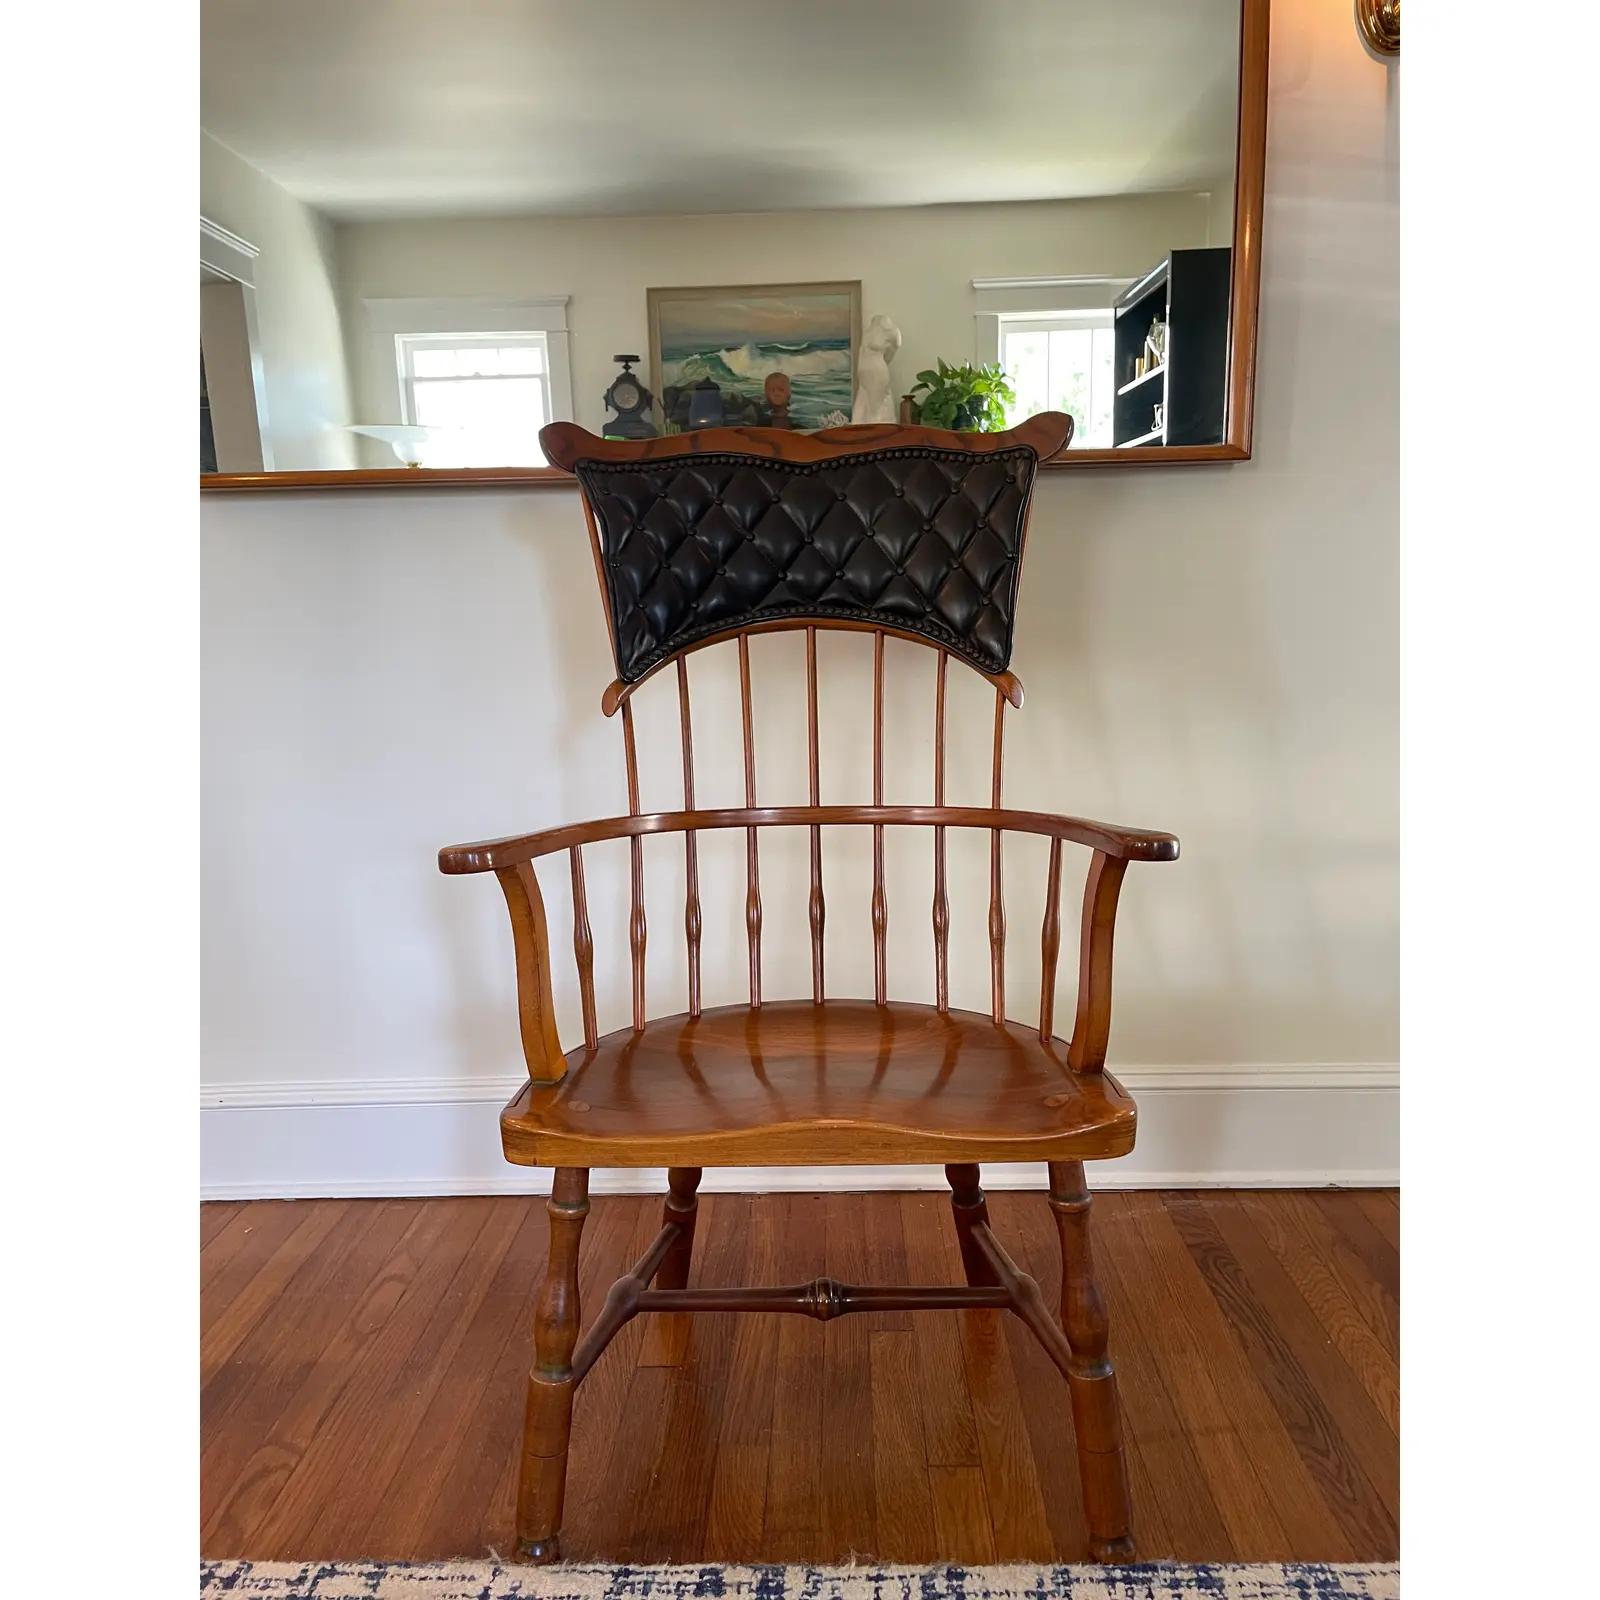 Vintage Duckloe Windsor Chair Mystic Seaport In Good Condition For Sale In W Allenhurst, NJ